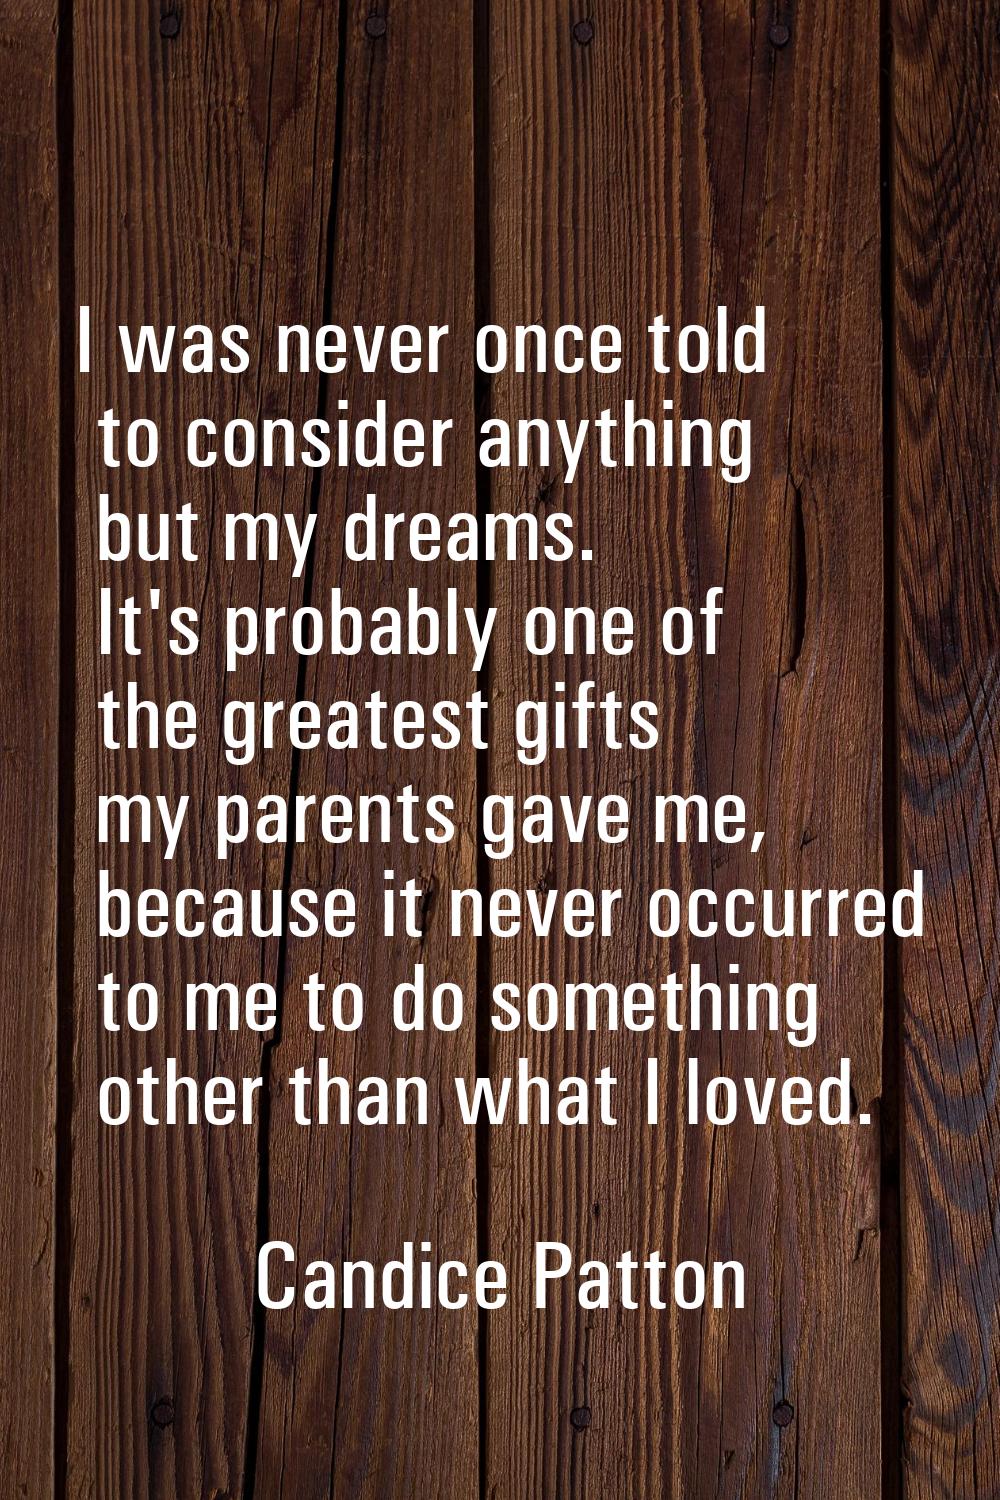 I was never once told to consider anything but my dreams. It's probably one of the greatest gifts m